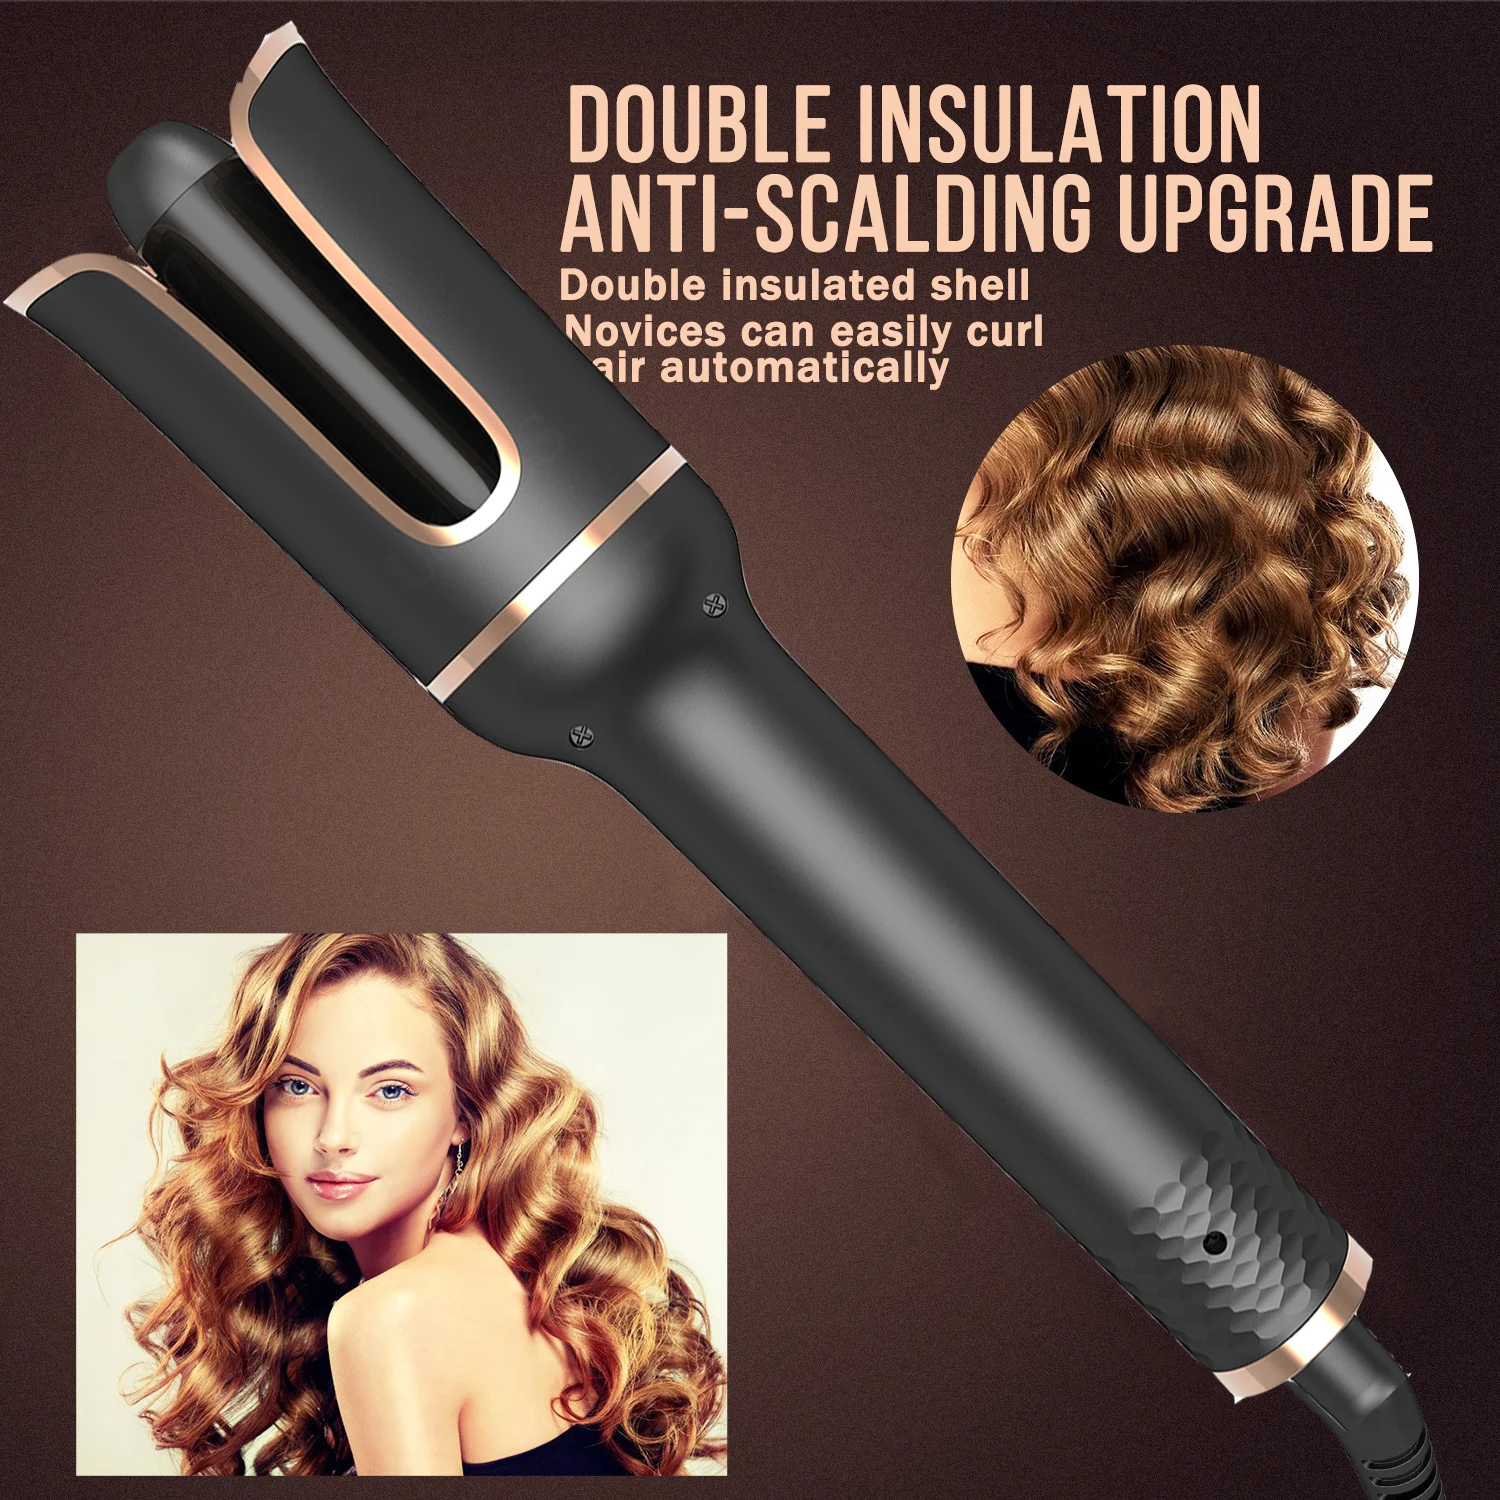 Multi Automatic Hair Curler Air Spin Curling Iron Auto Rotating Ceramic Rotating Hair Waver Magic Wand Irons Hair Styling Tools multi automatic hair curler hair curling iron lcd ceramic rotating hair waver magic curling wand irons hair styling tools